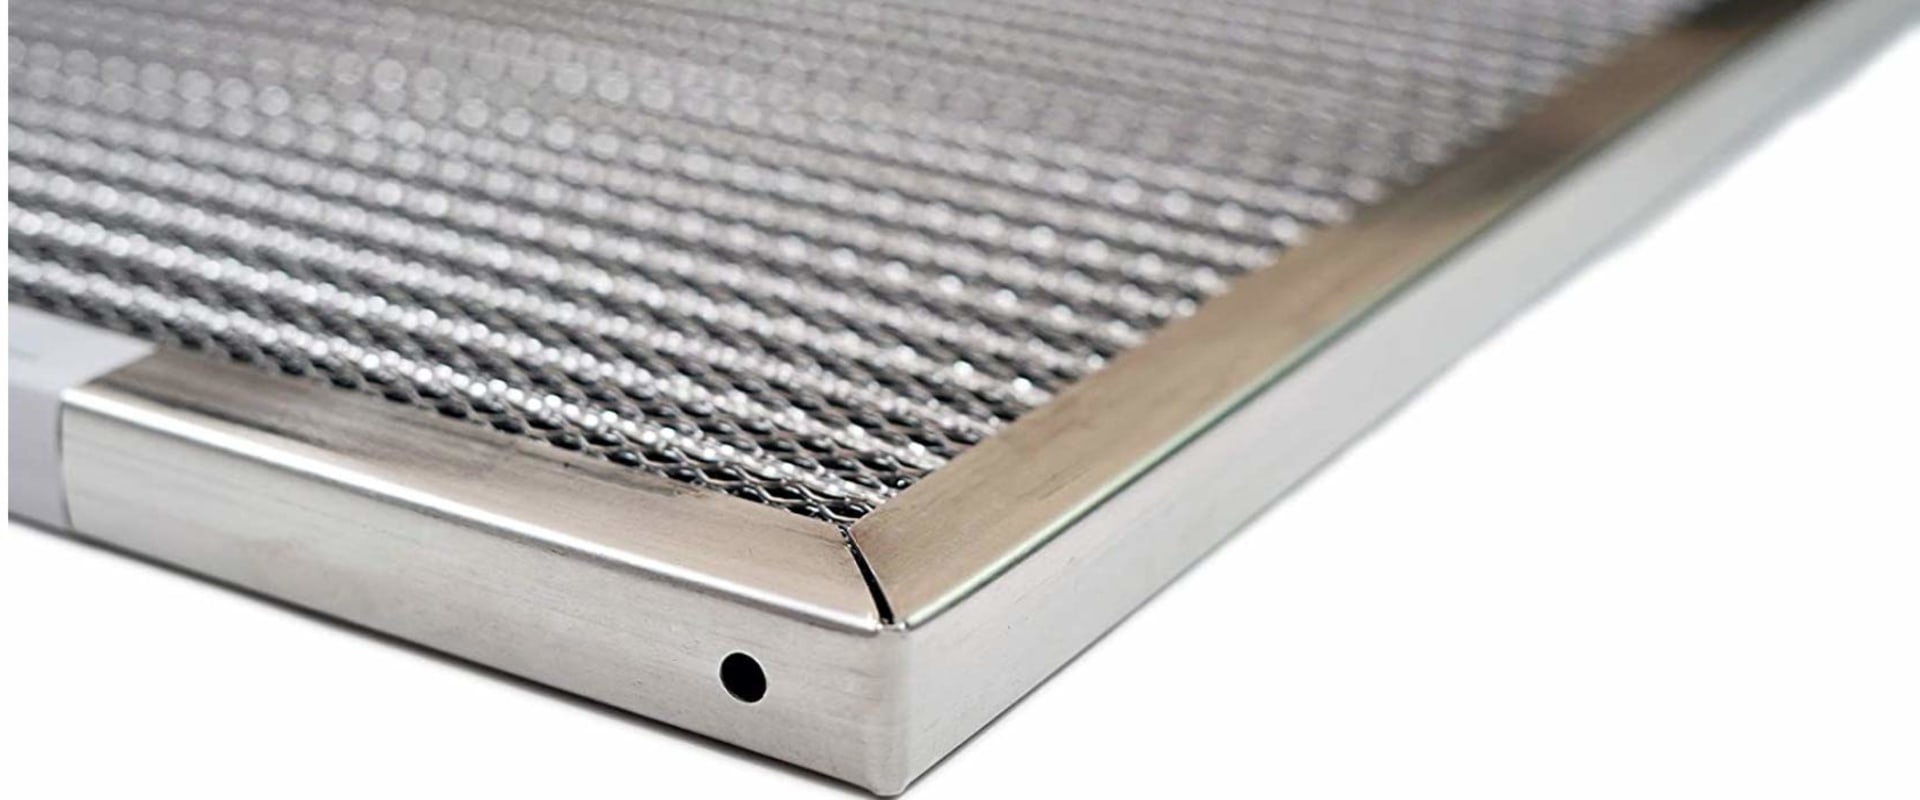 How Often Should You Change Your Electrostatic 14x18x1 Air Filters?